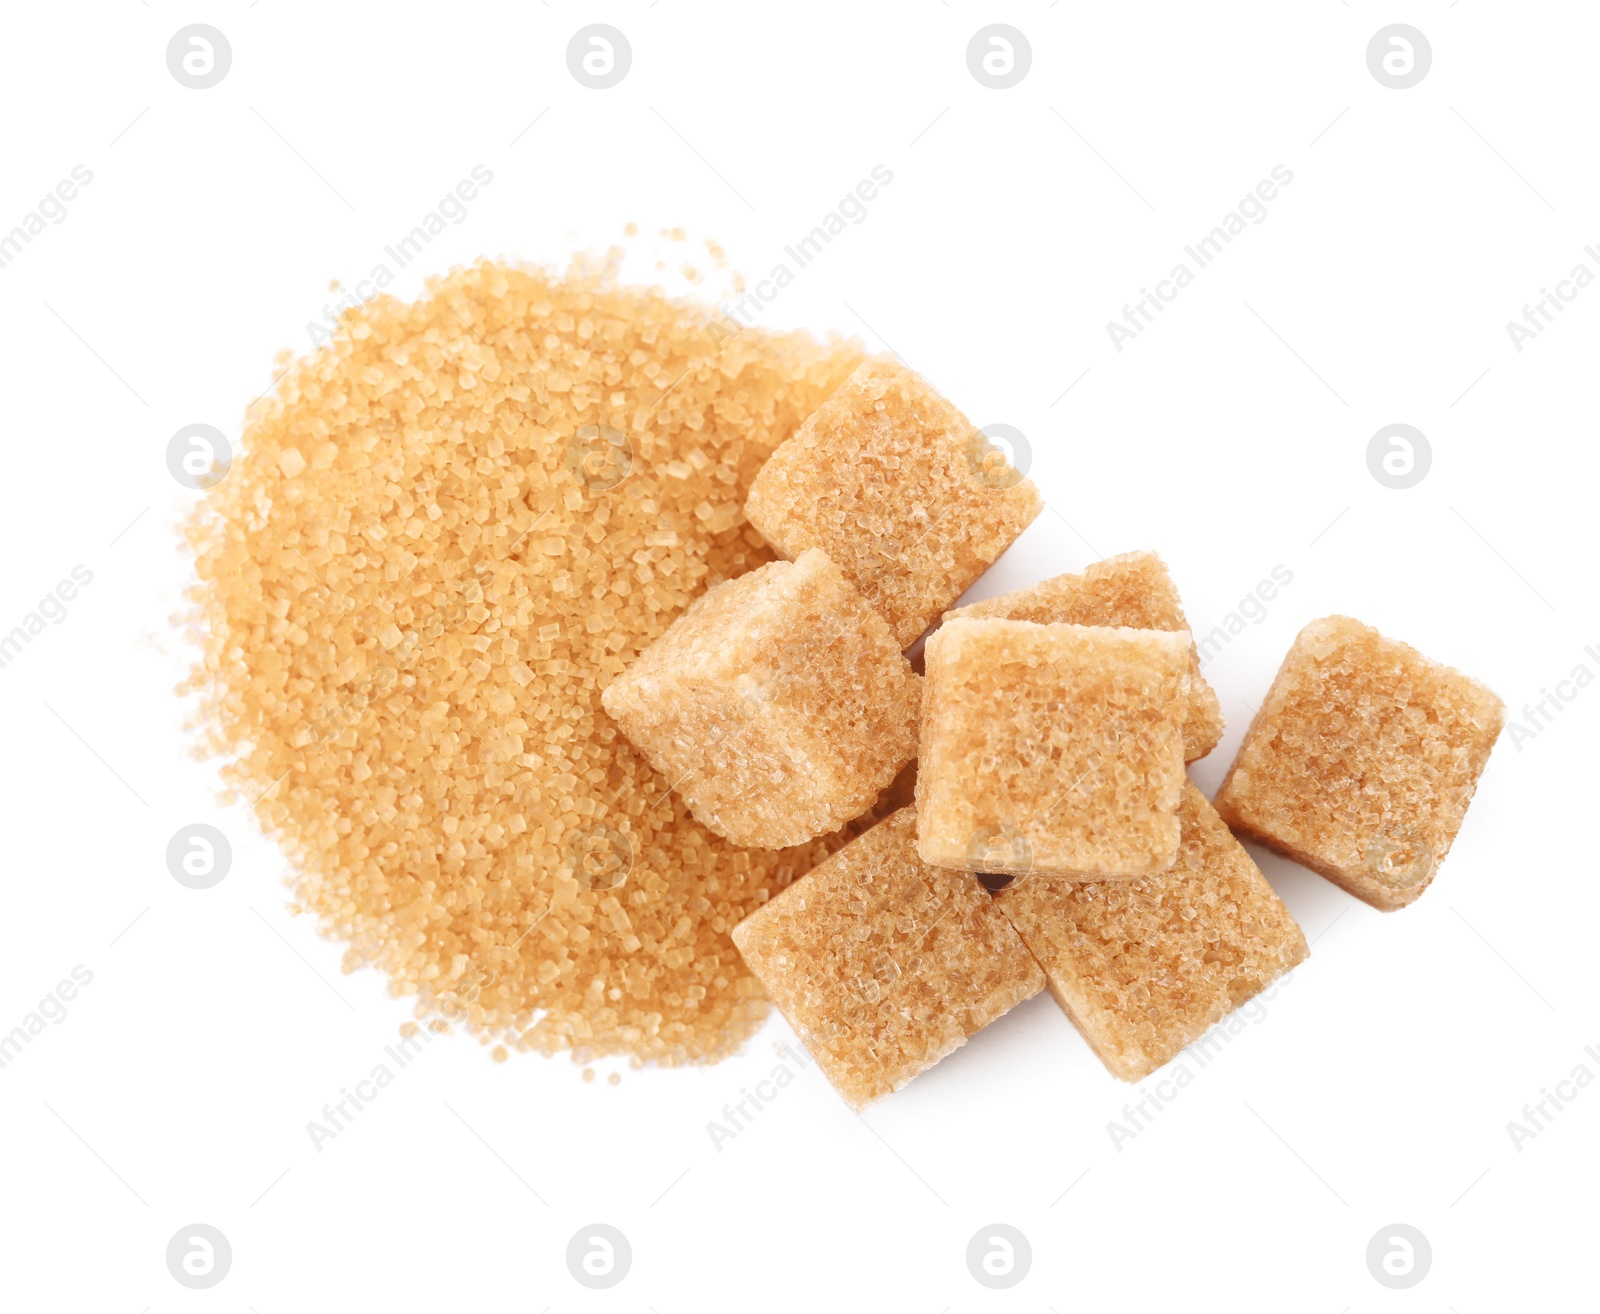 Photo of Granulated and cubed brown sugar on white background, top view